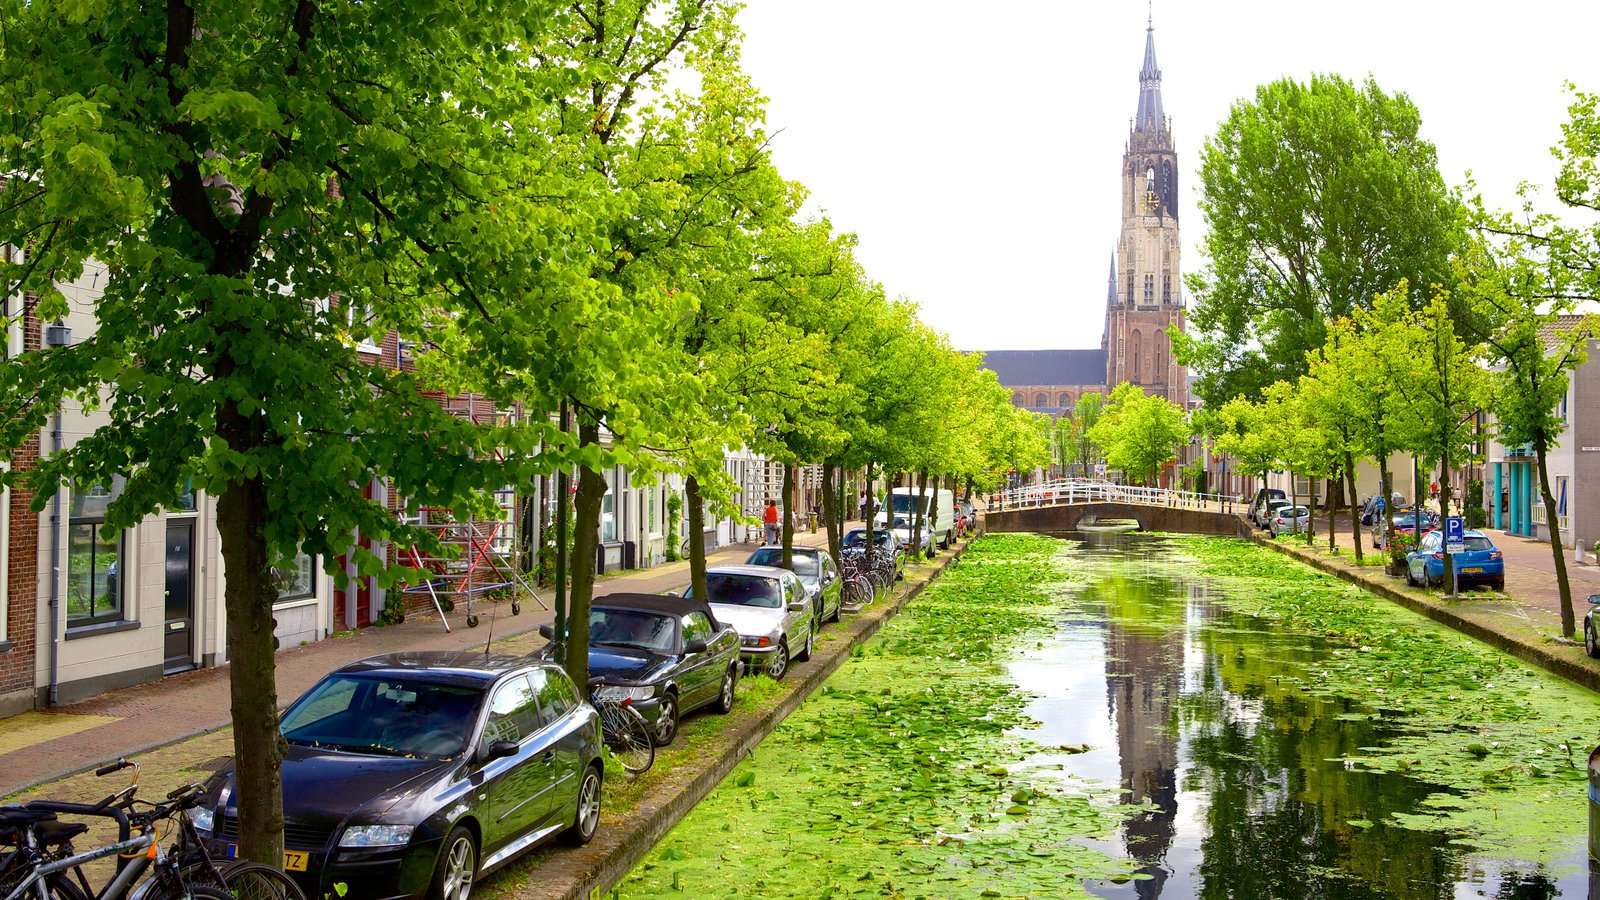 A canal in Delft. Netherlands. jigsaw puzzle online